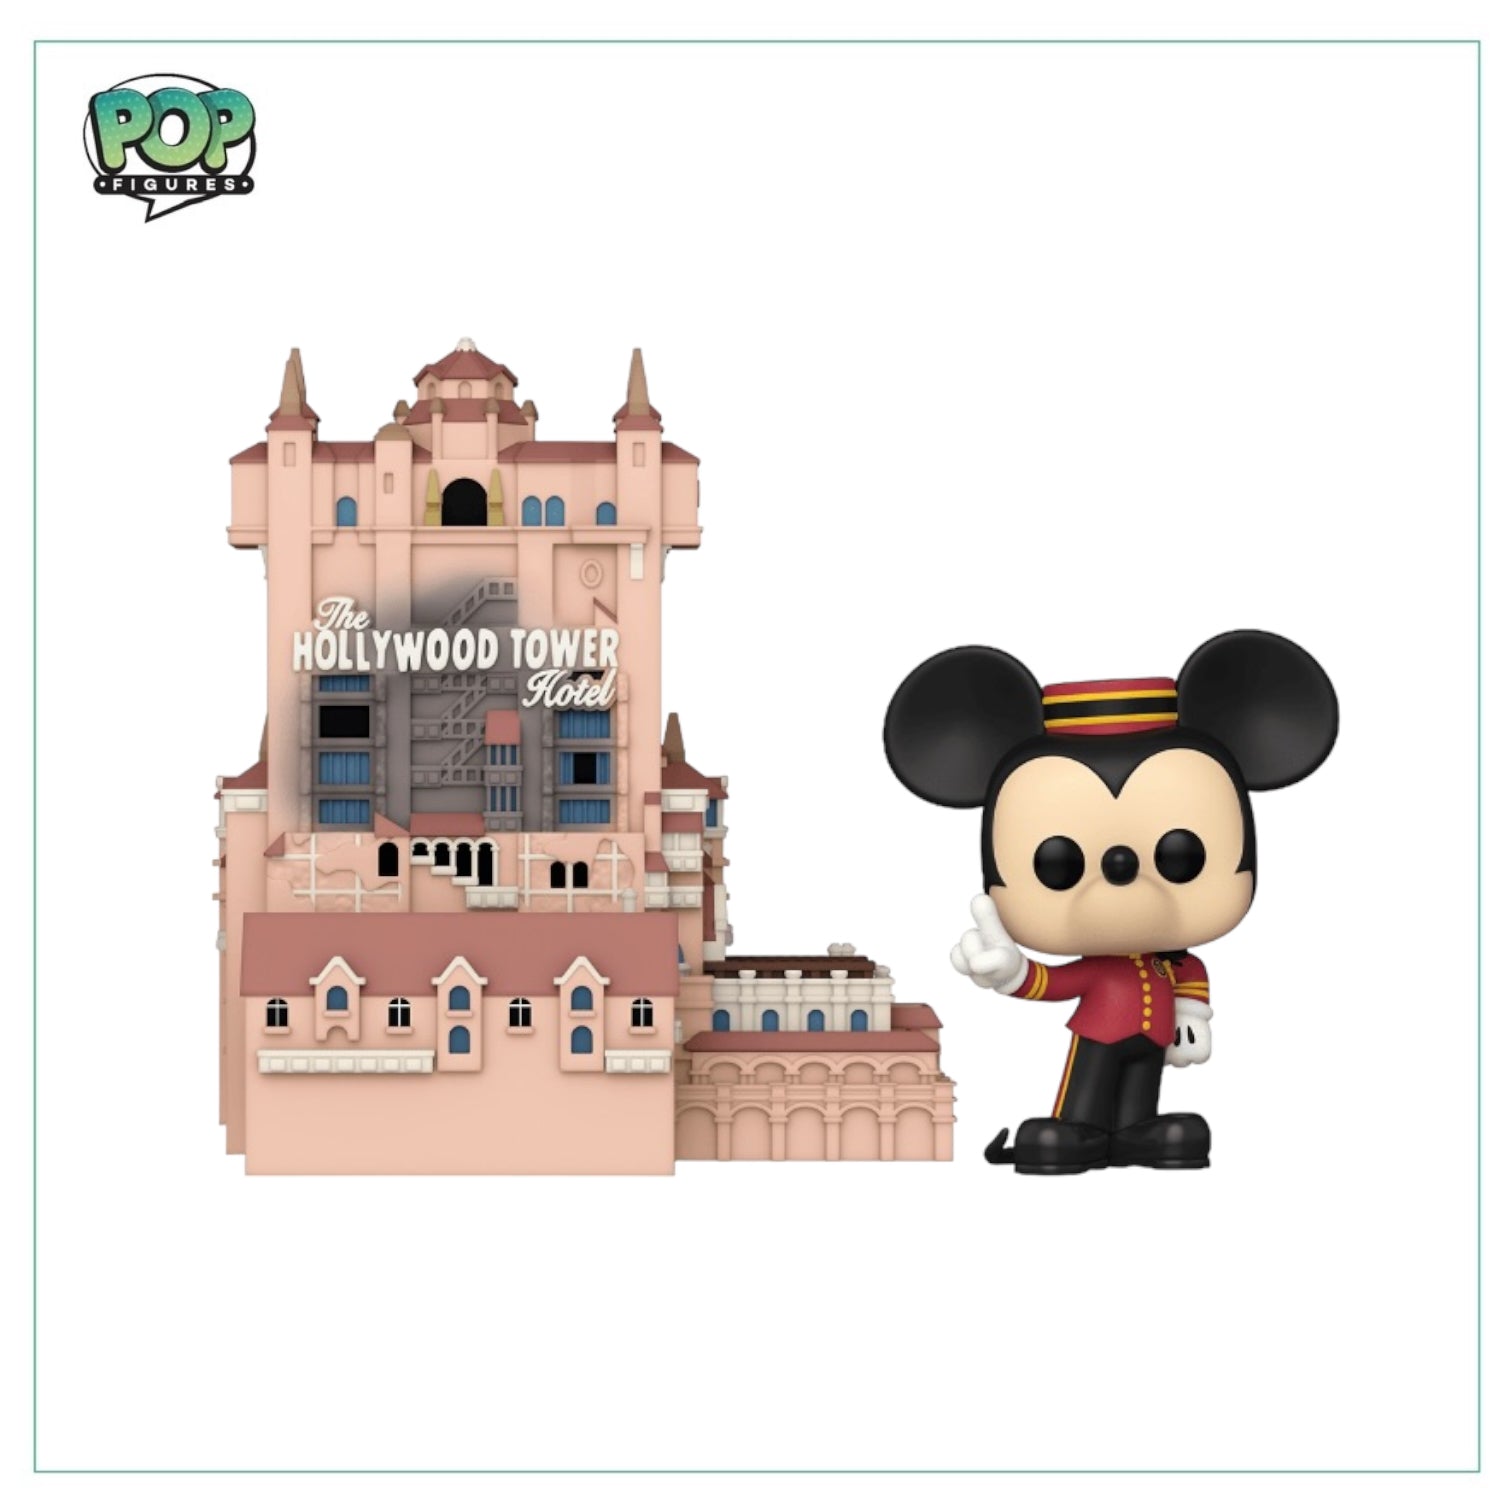 Hollywood Tower Hotel and Mickey Mouse #31 Town Funko Pop! - Walt Disney World 50th